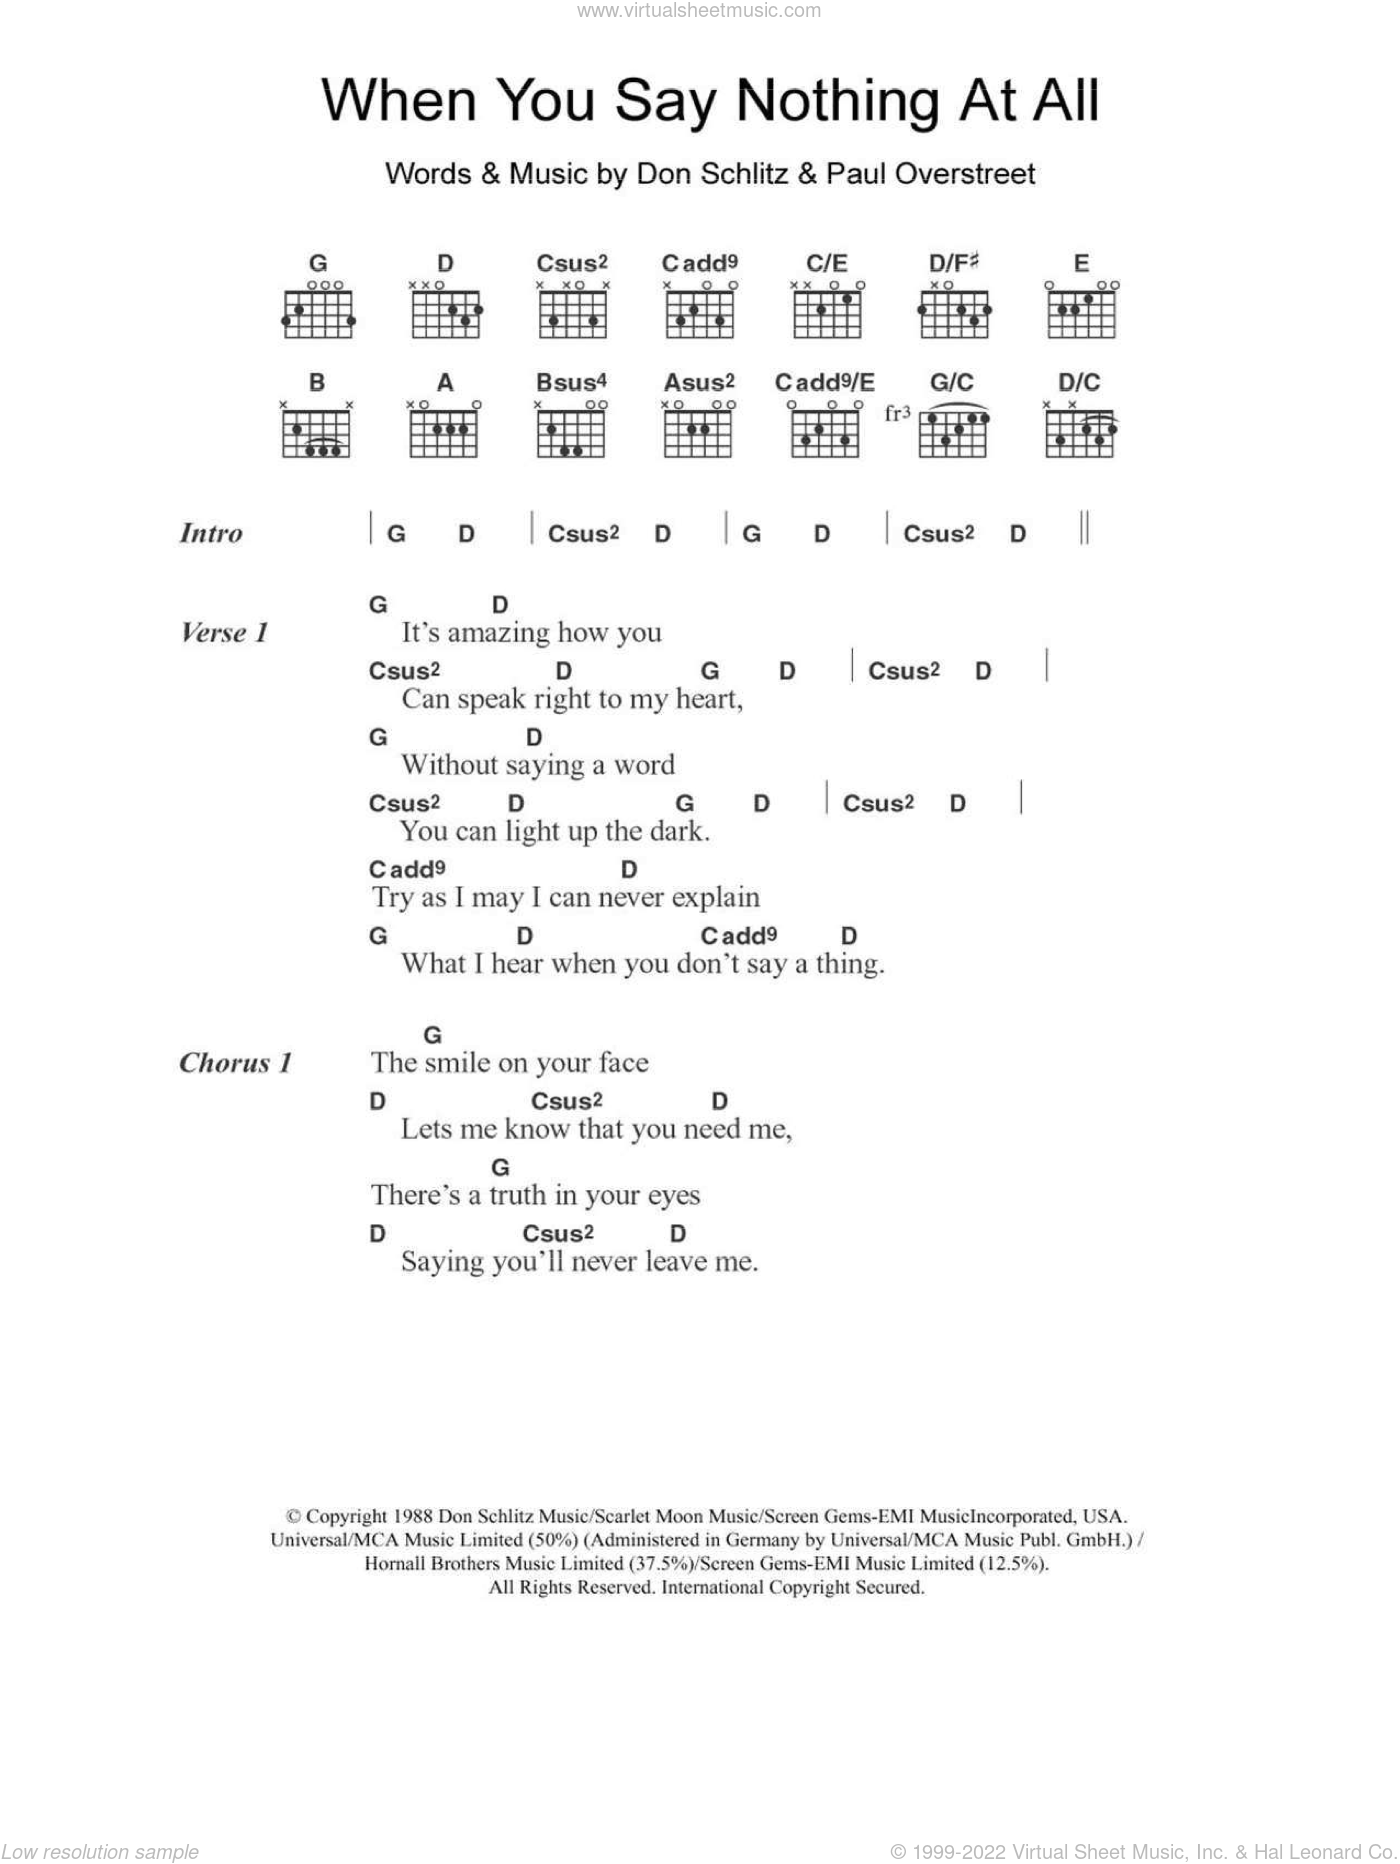 Keating - You Say Nothing All sheet music for guitar (chords)